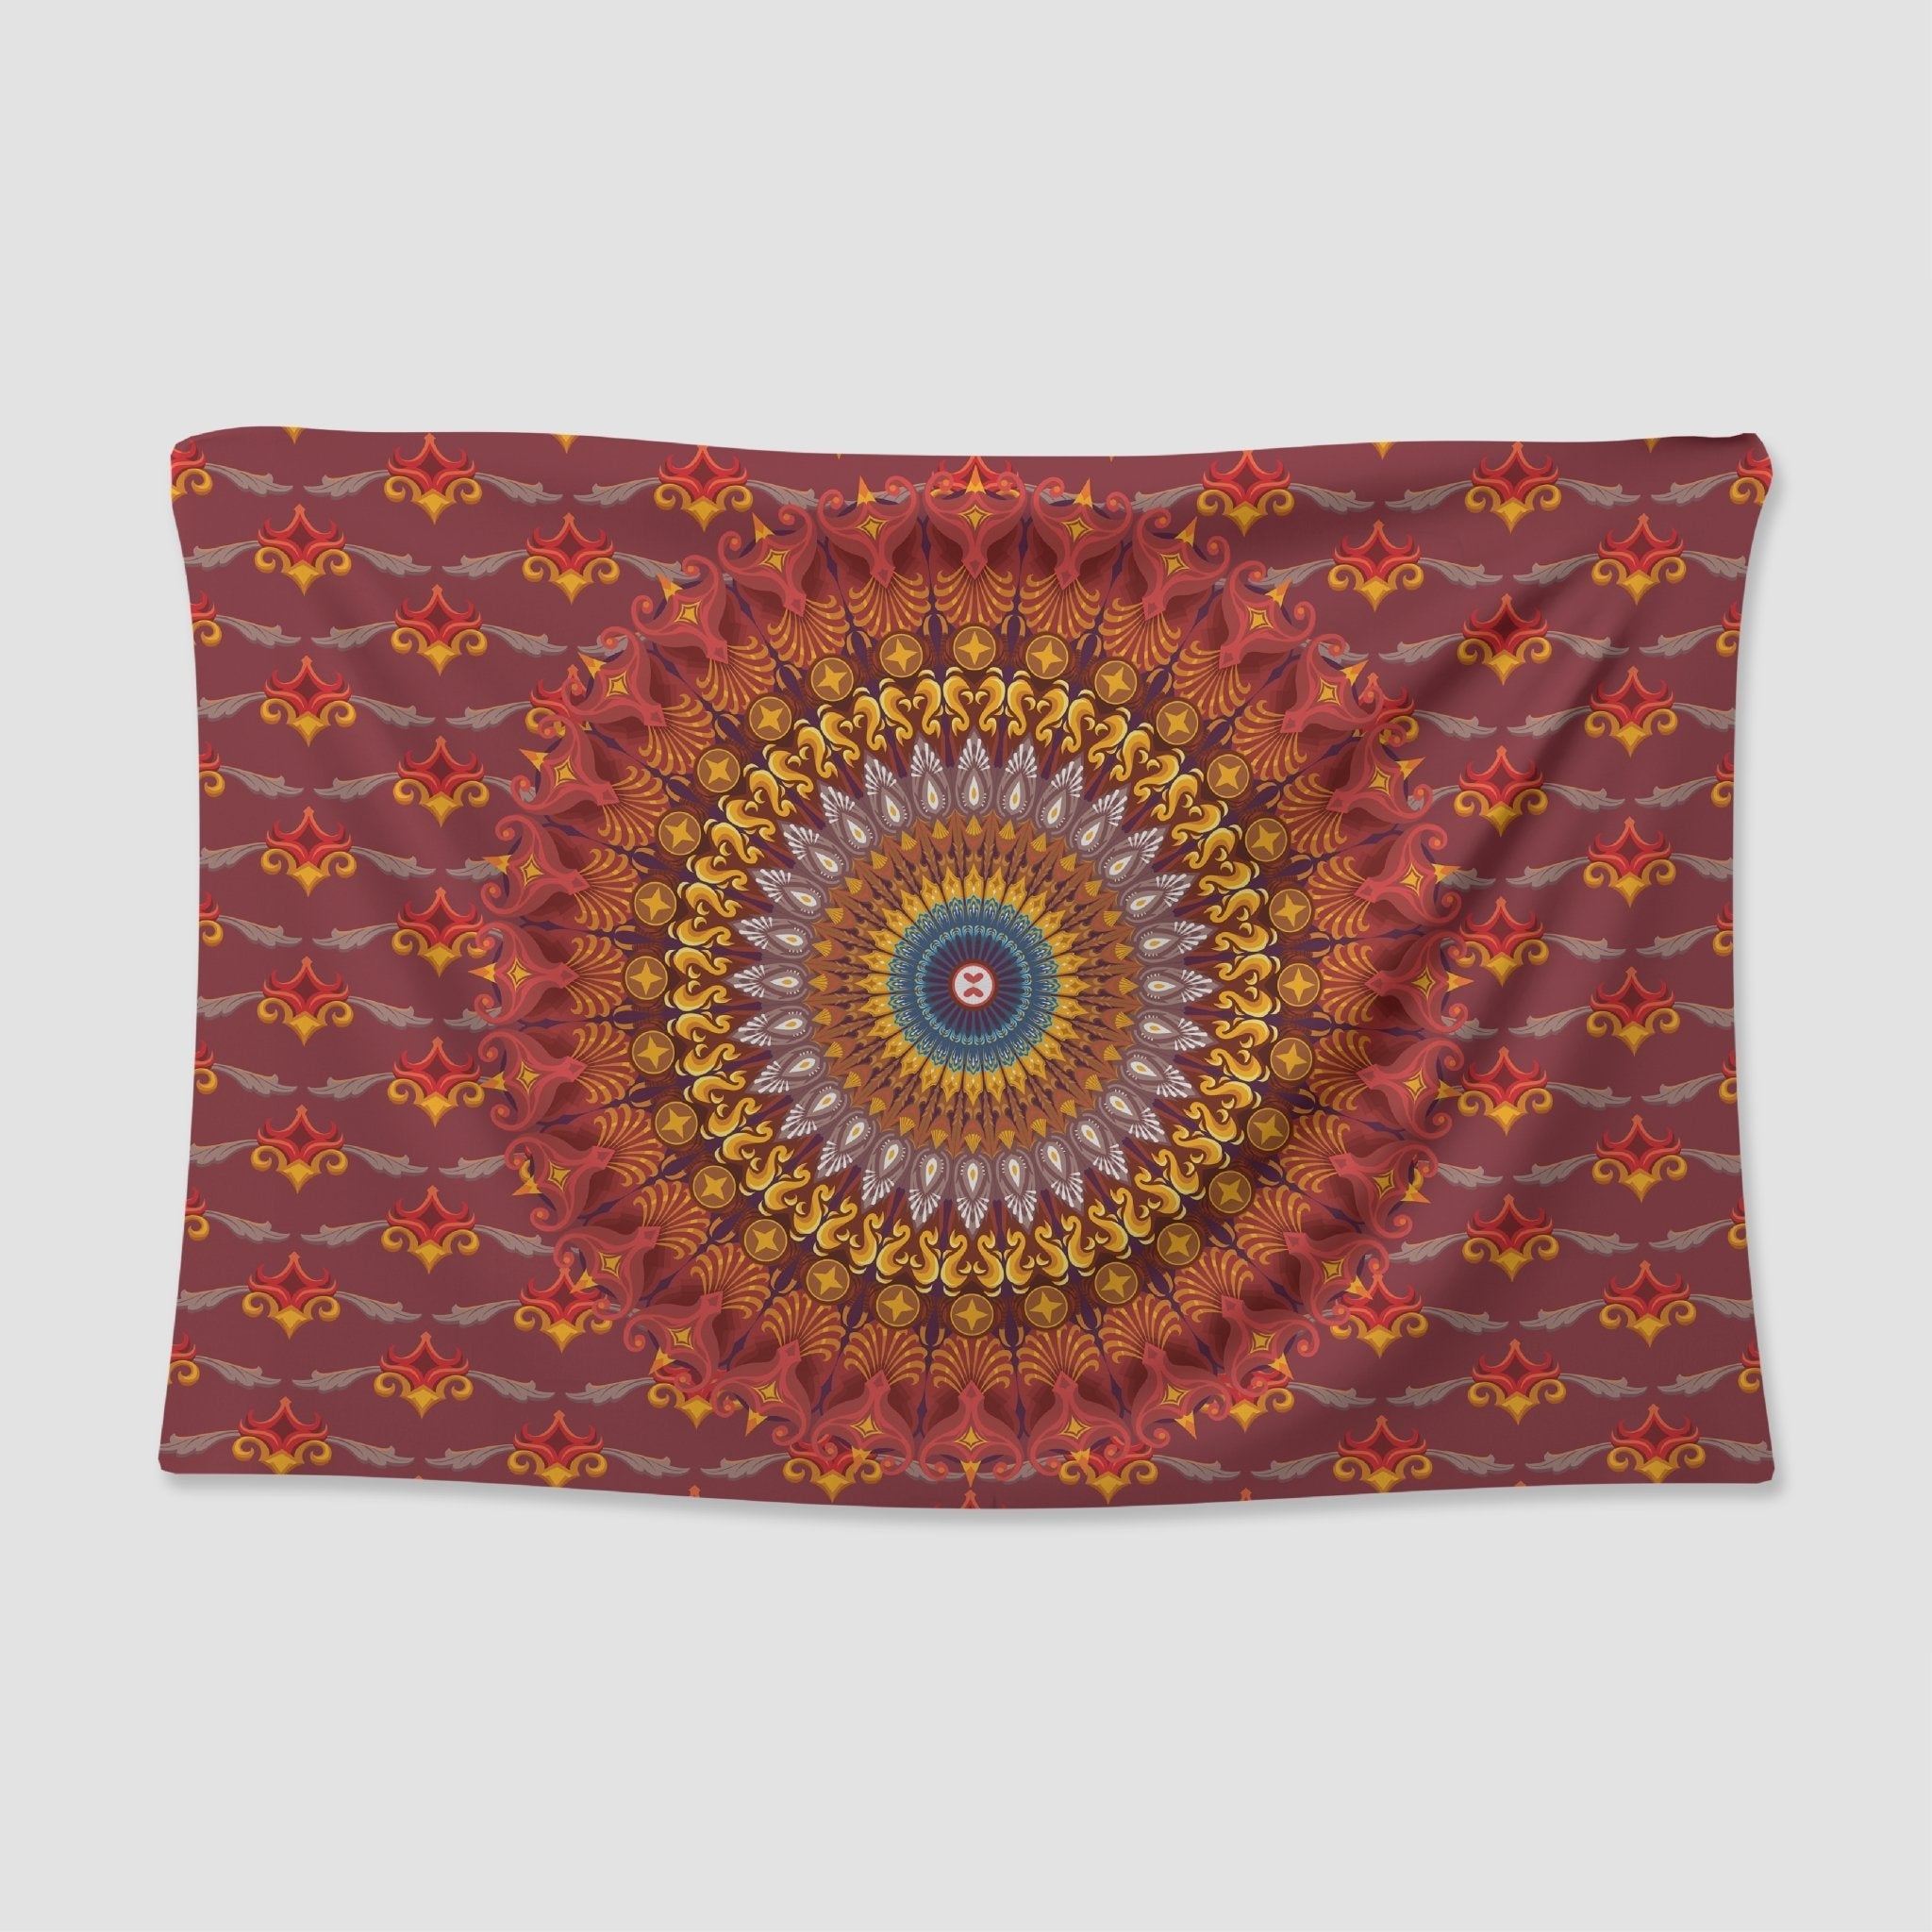 Boho Mexican Tapestry